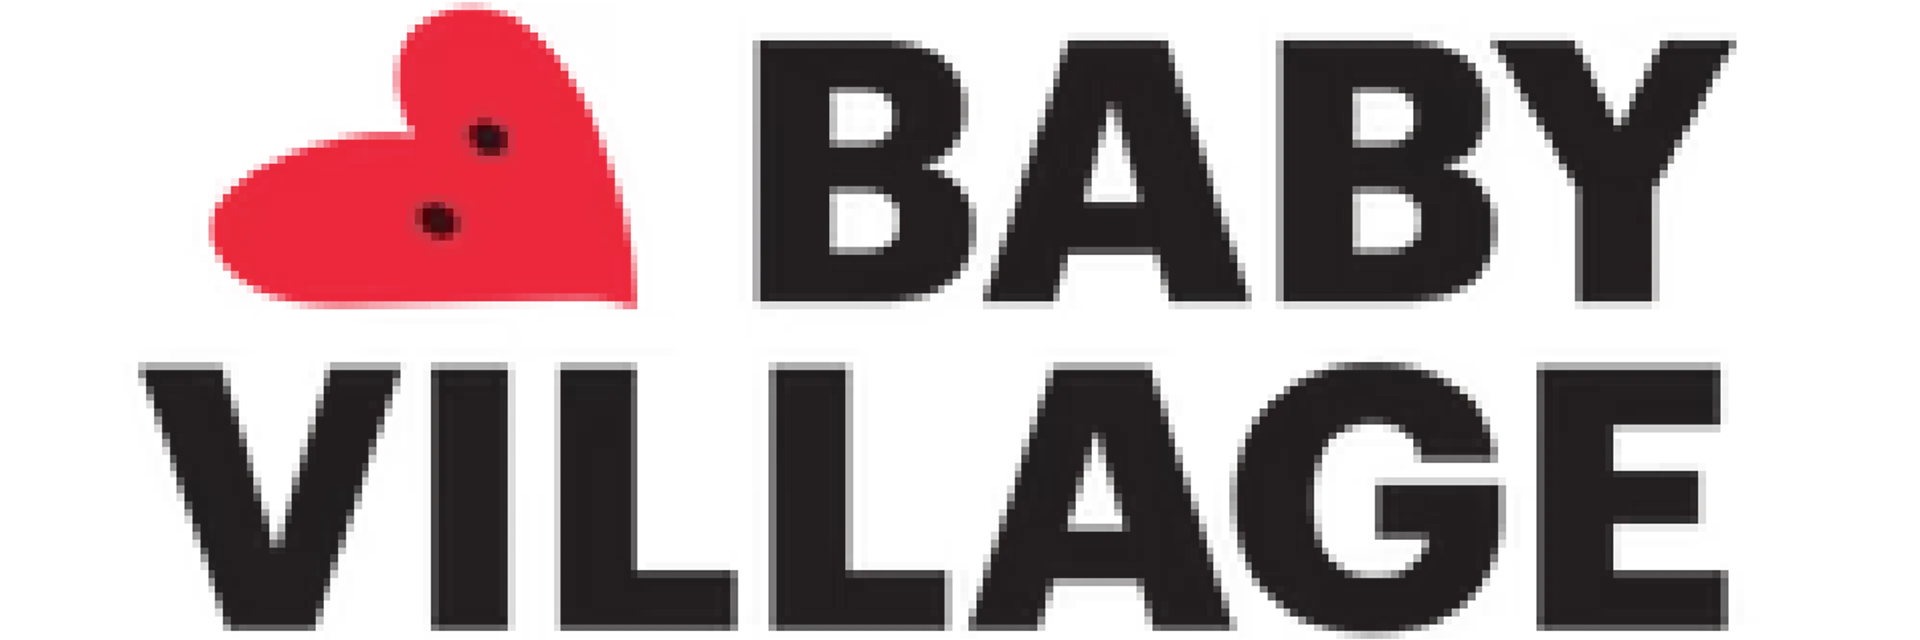 BABY VILLAGE logo of current catalogue